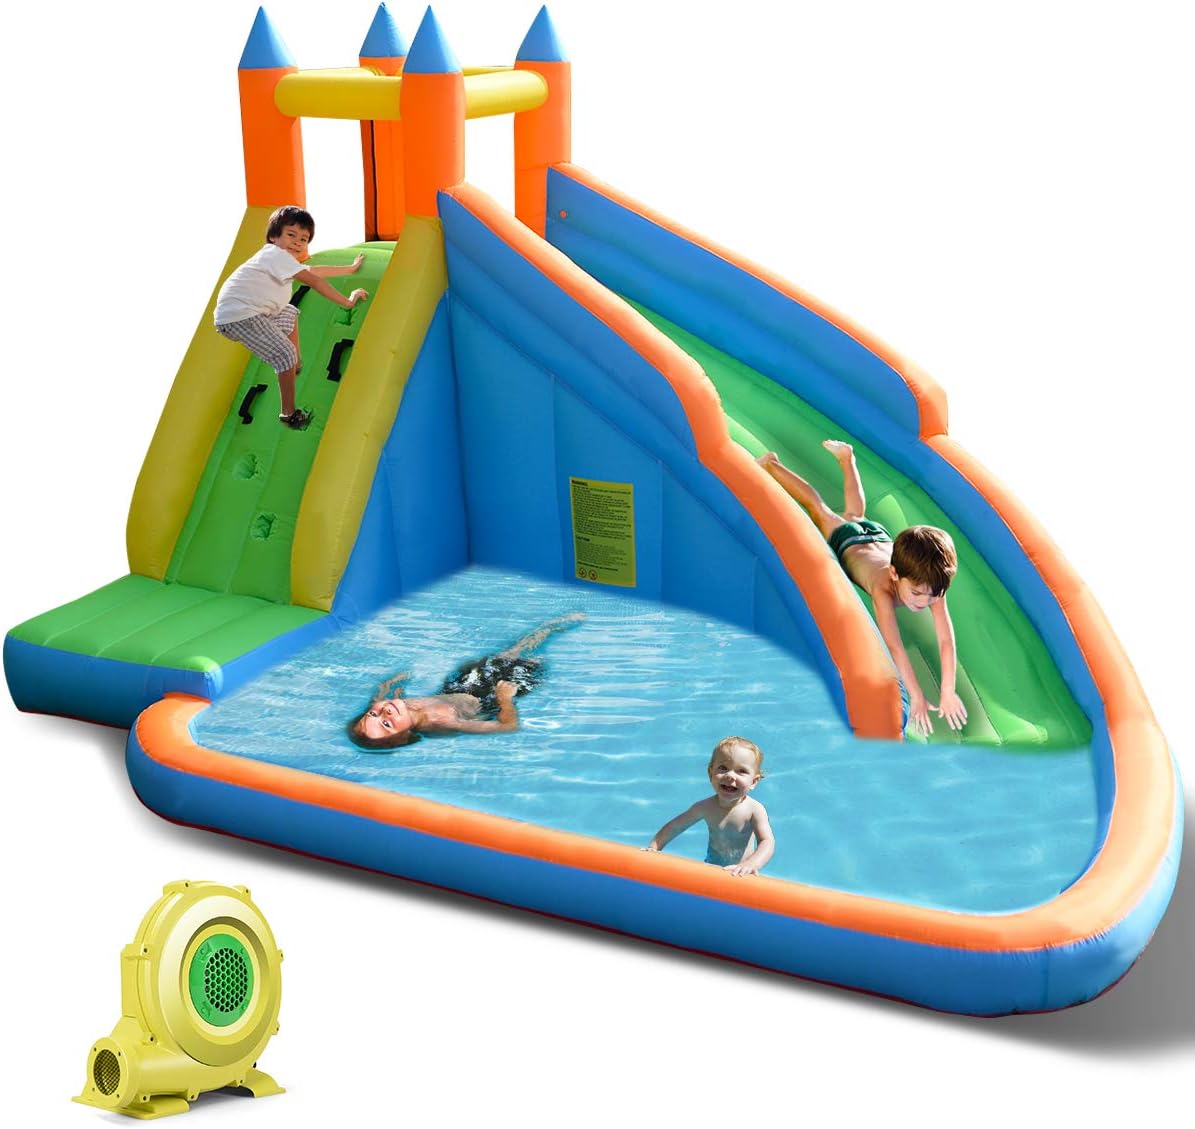 Costzon Inflatable Water Slide, Giant Bouncy Waterslide Park for Kids Backyard Outdoor Fun with 480w Blower, Climbing Wall, Splash Pool, Blow up Water Slides Inflatables for Kids and Adults Party Gift